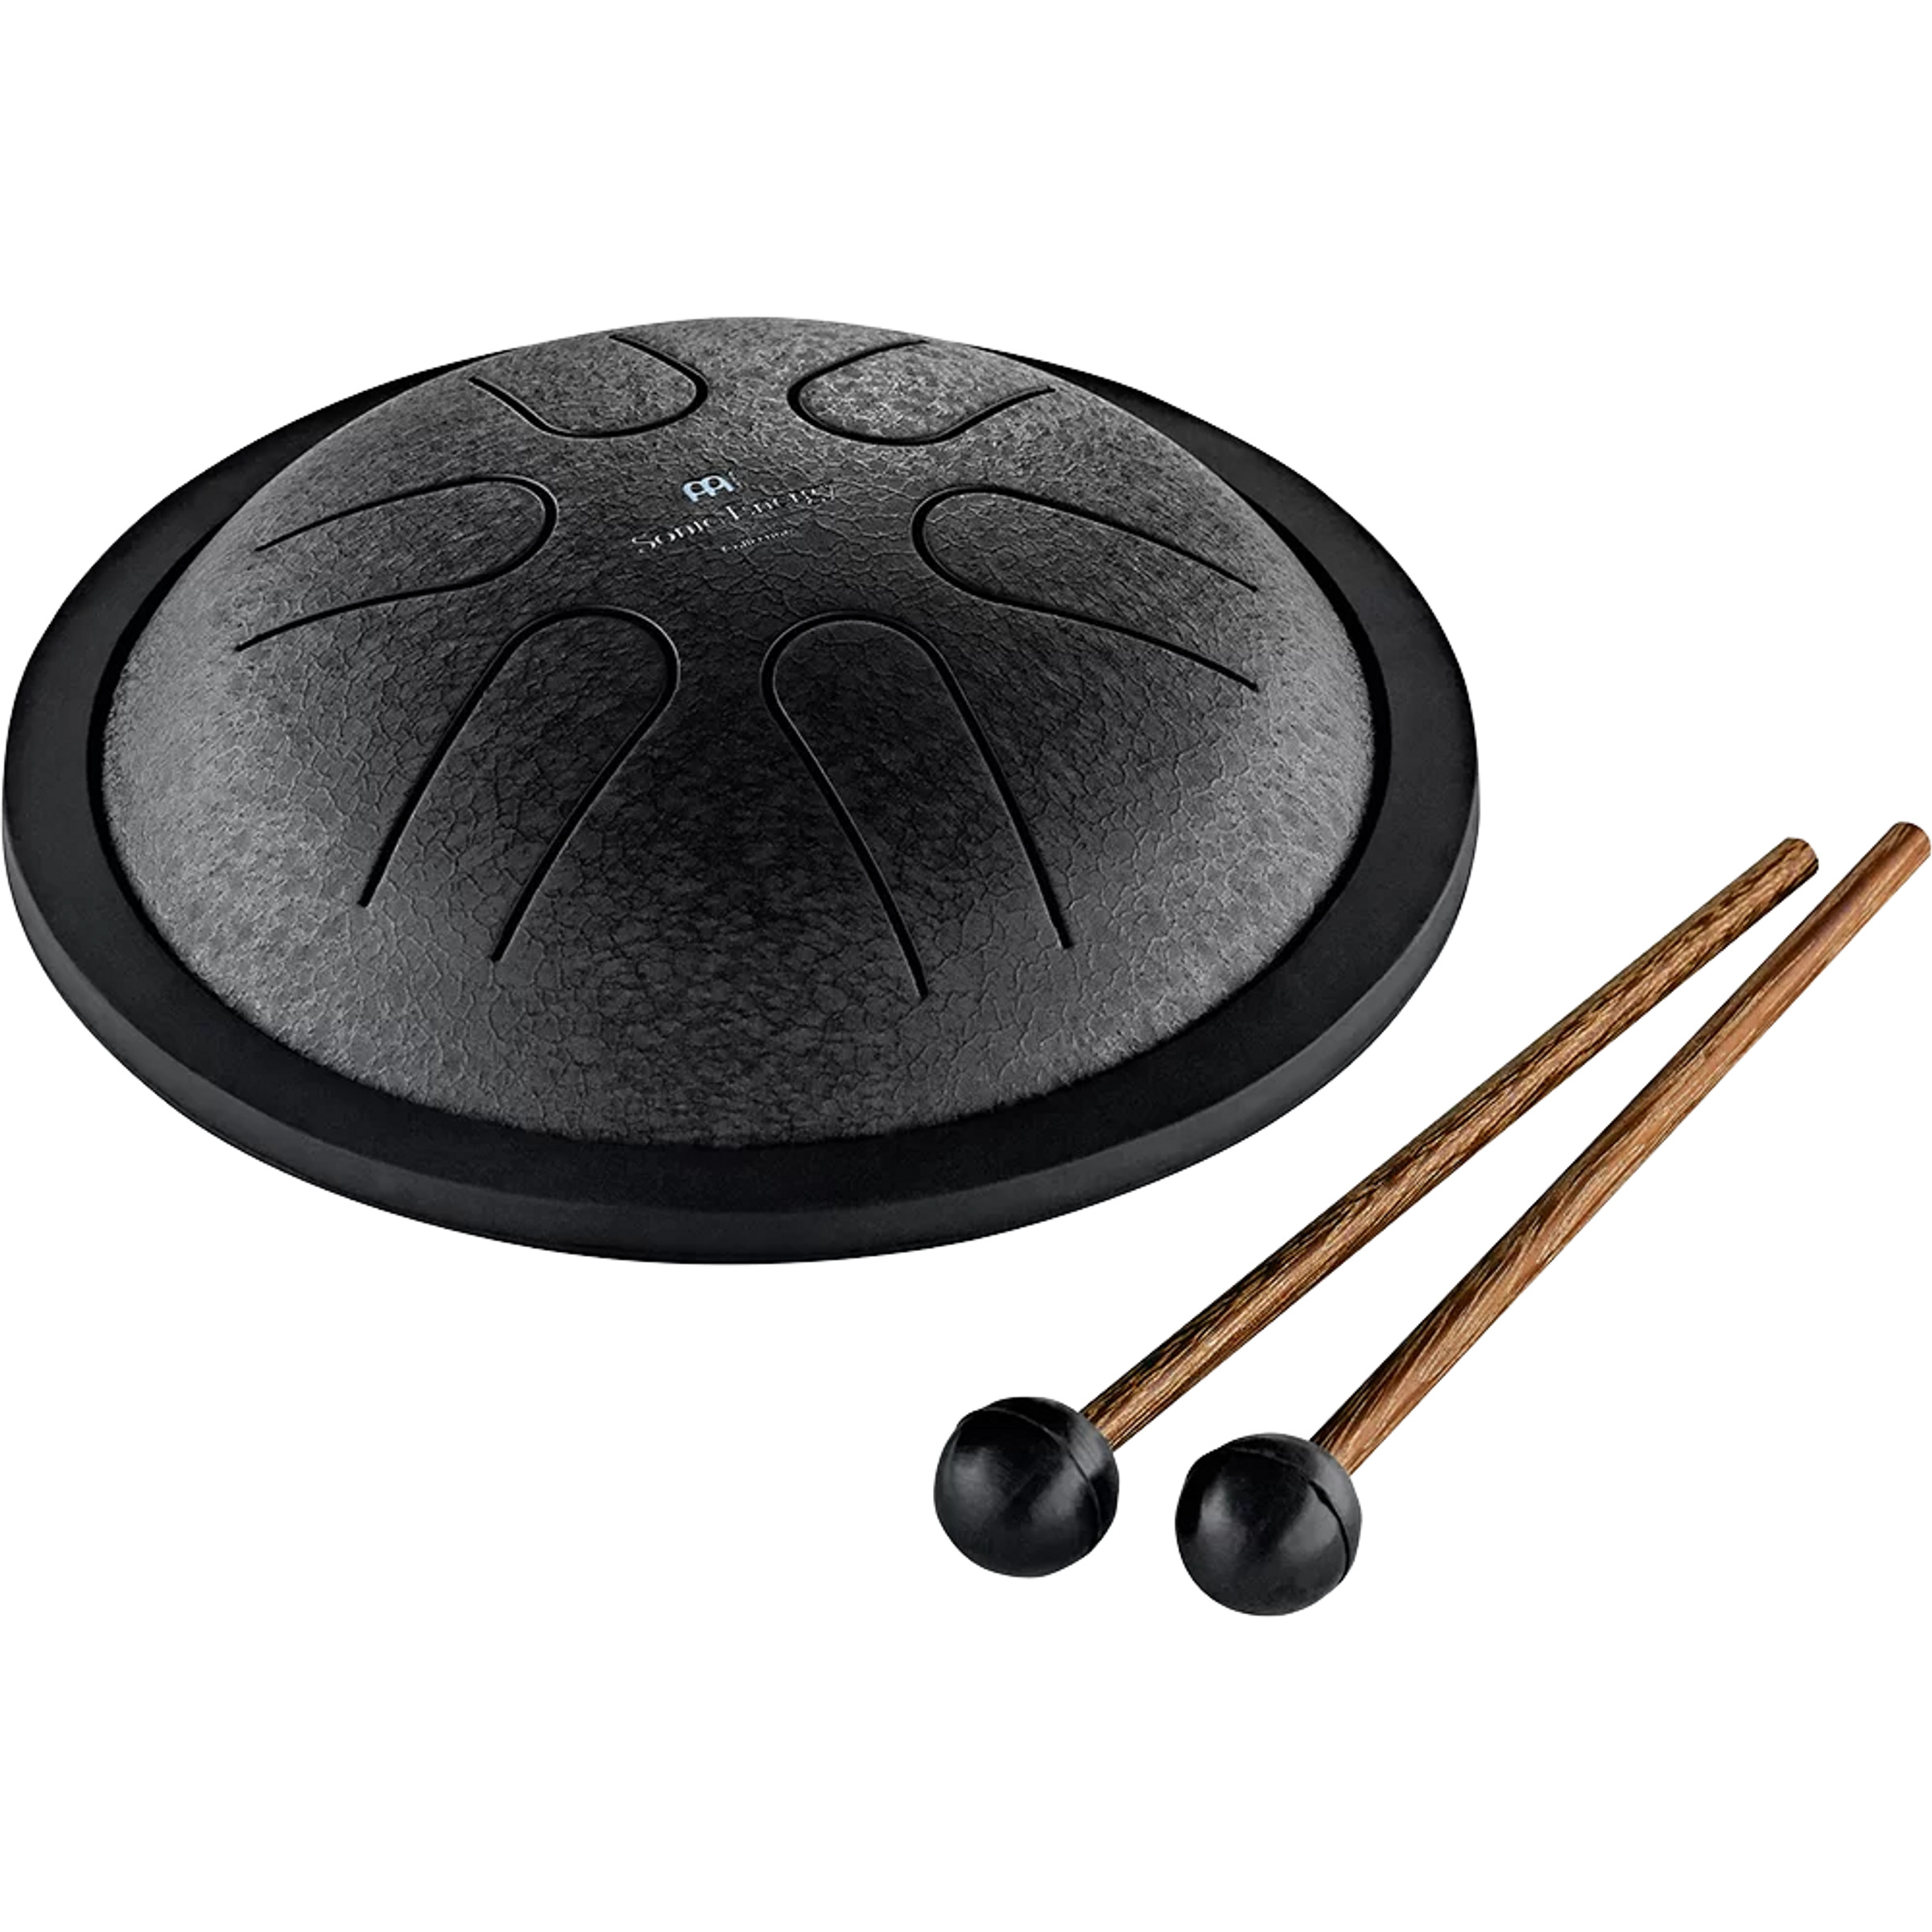 ChunFeng Steel Tongue Drum -14 Inches 15 Notes Handpan Healing